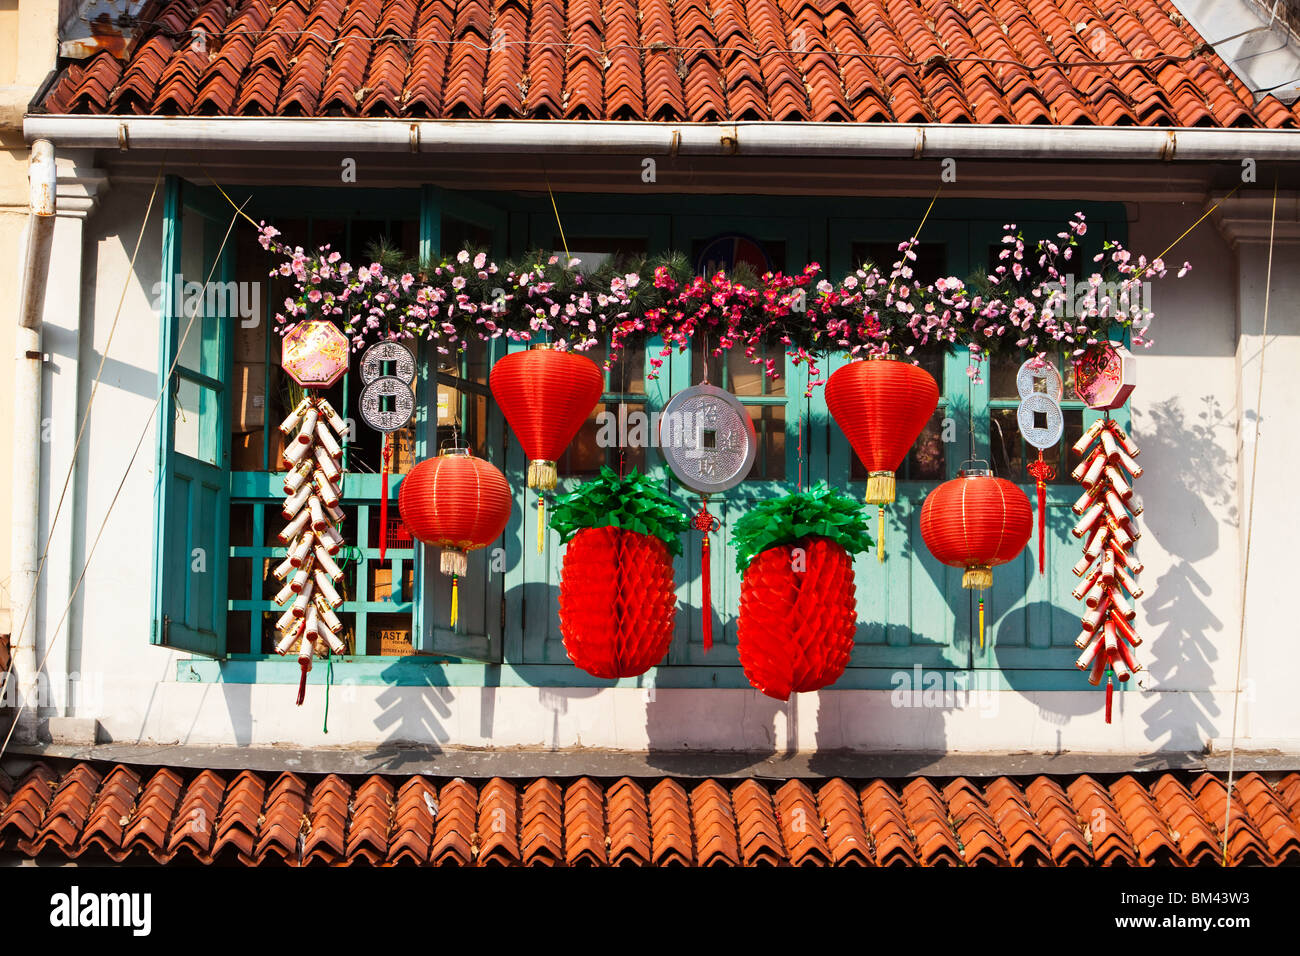 Chinese New Year decorations on a shophouse in Kampong Glam, Singapore Stock Photo